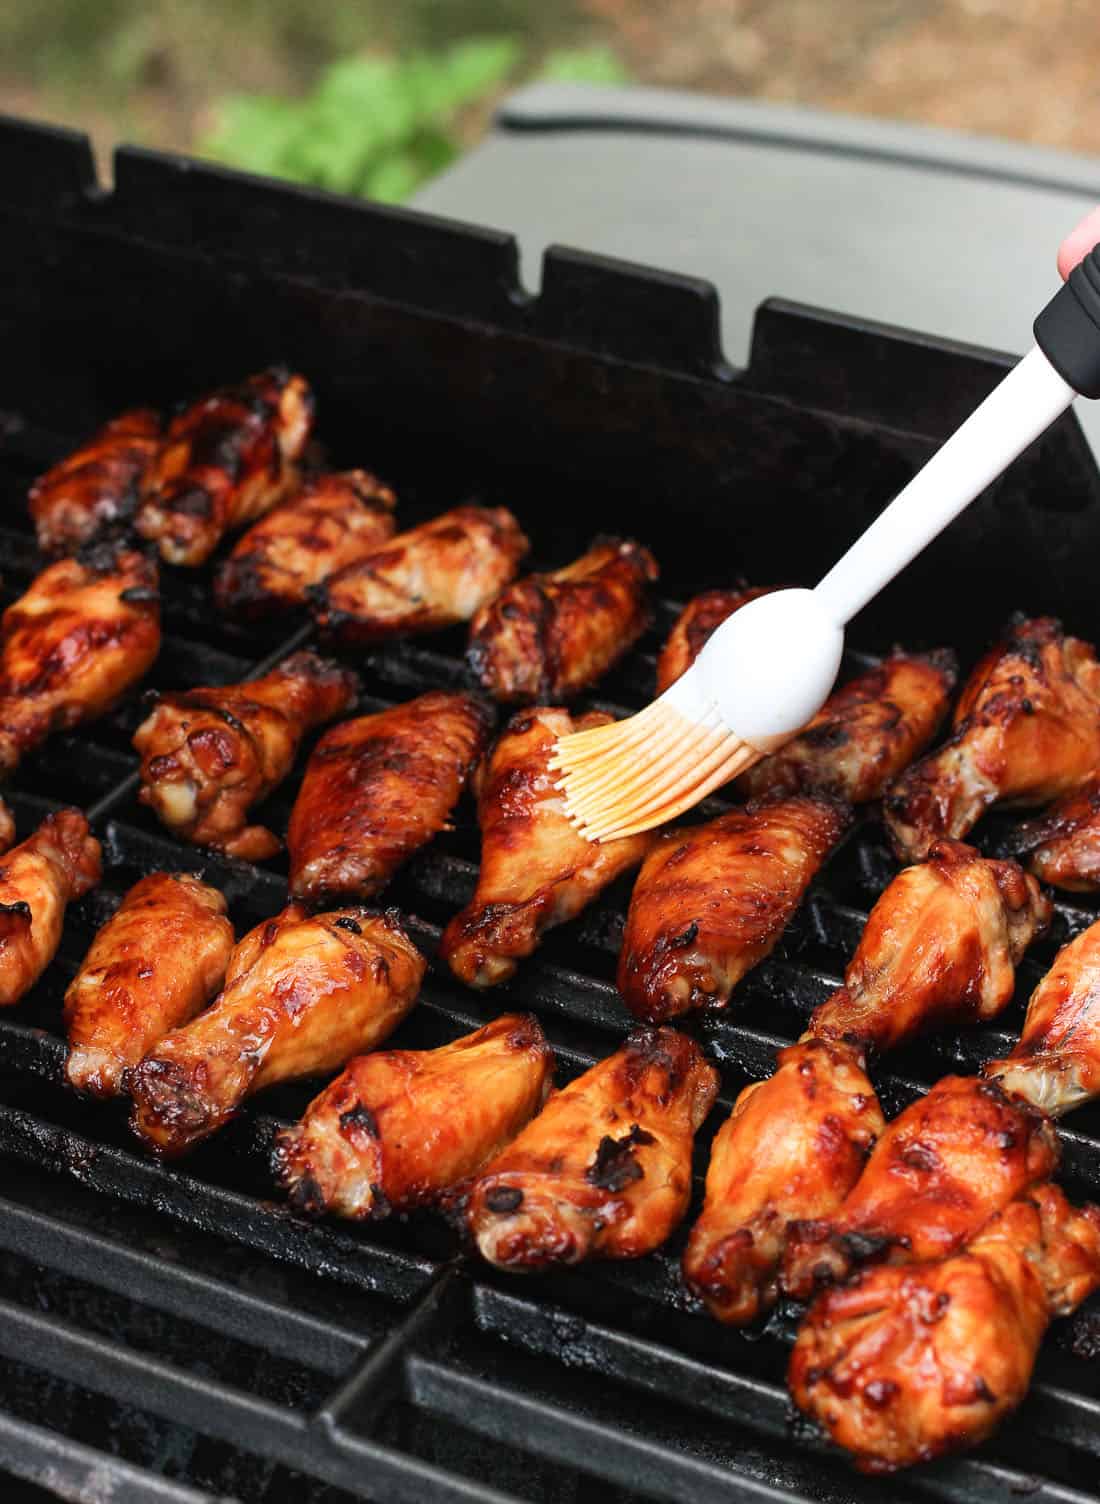 A hand brushing hot sauce on the cooked wings on a grill.